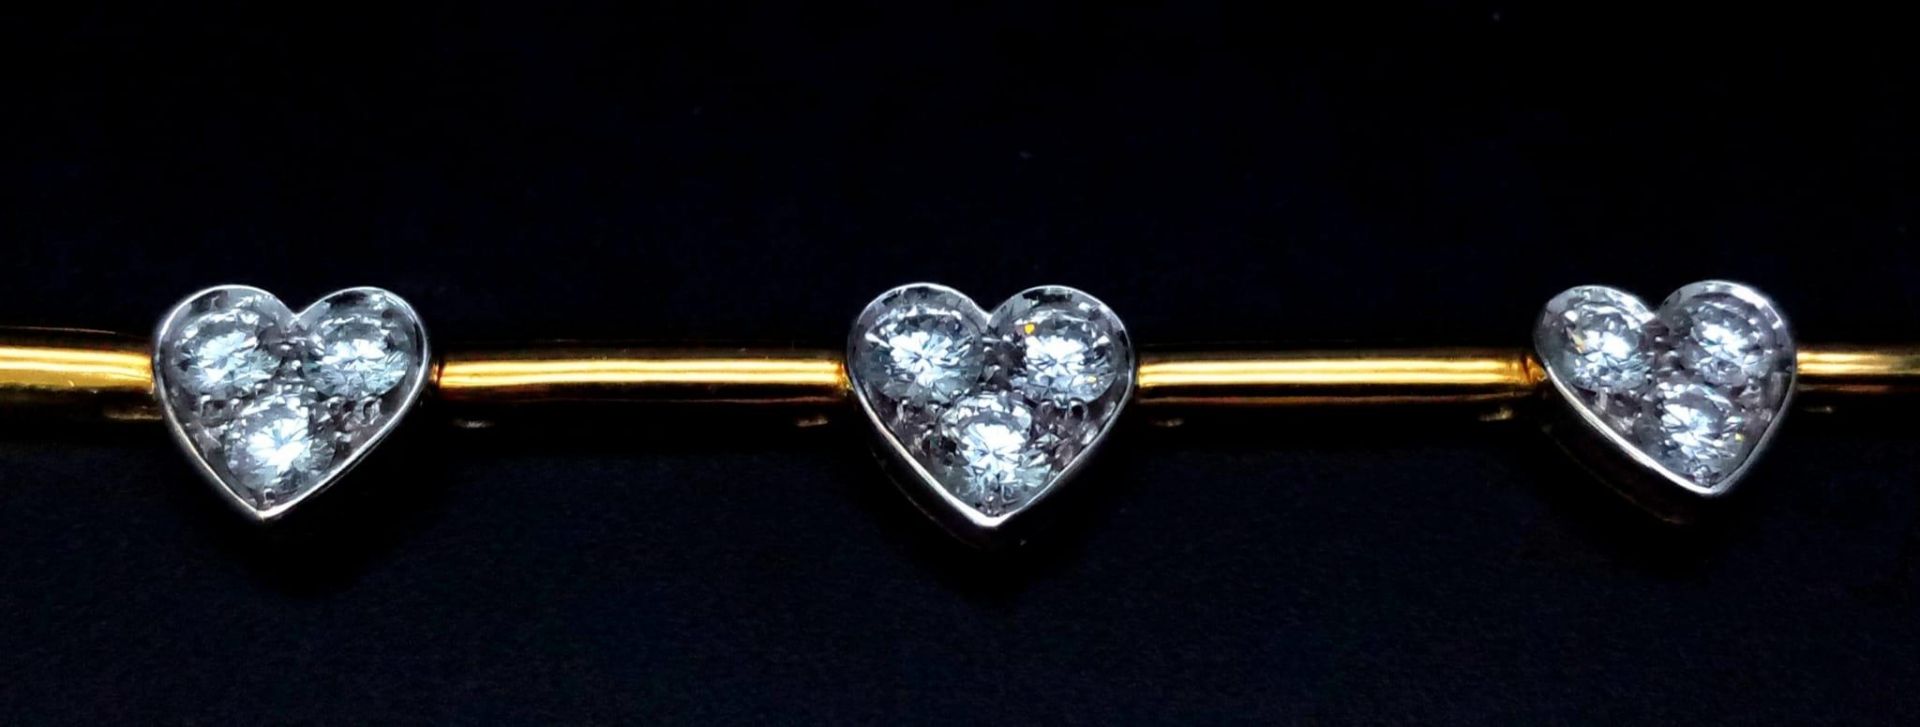 A Gorgeous 18K Gold and Heart-Diamond Necklace and Bracelet Set. The necklace is decorated with - Image 17 of 21